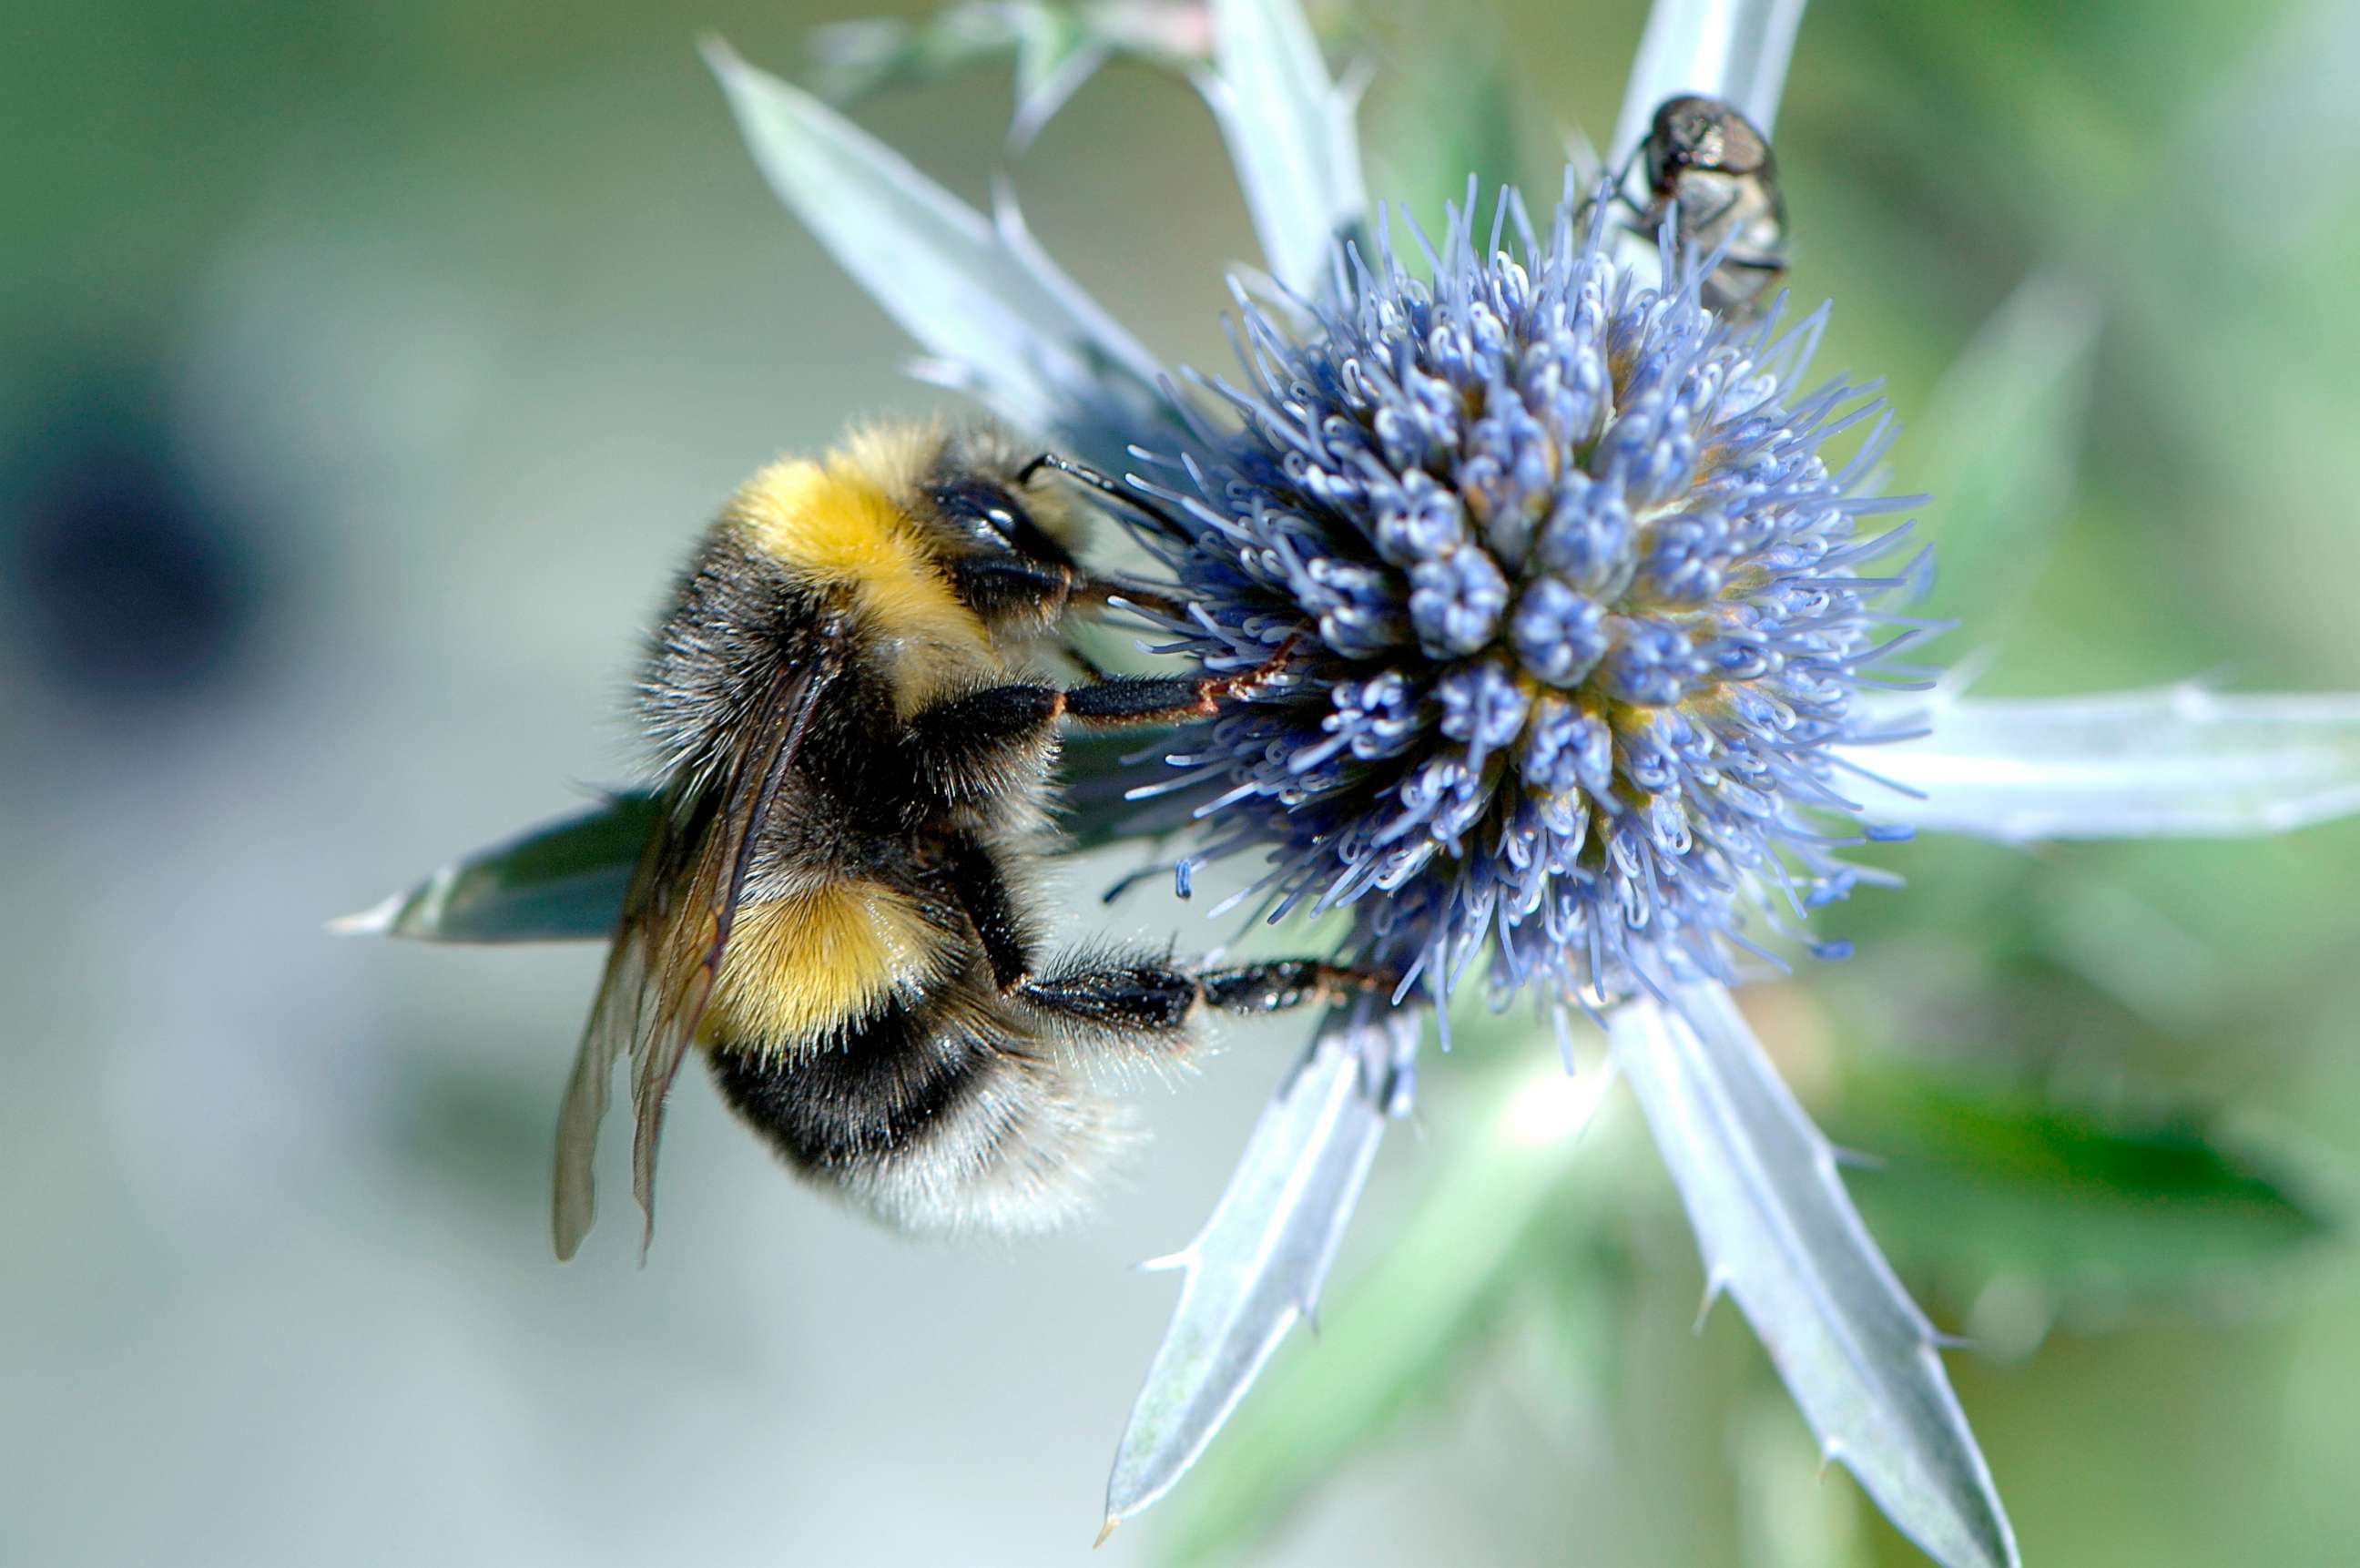 PHOTO: A Bumble Bee sits on a blue flower, Aug. 13, 2007, in this file photo.